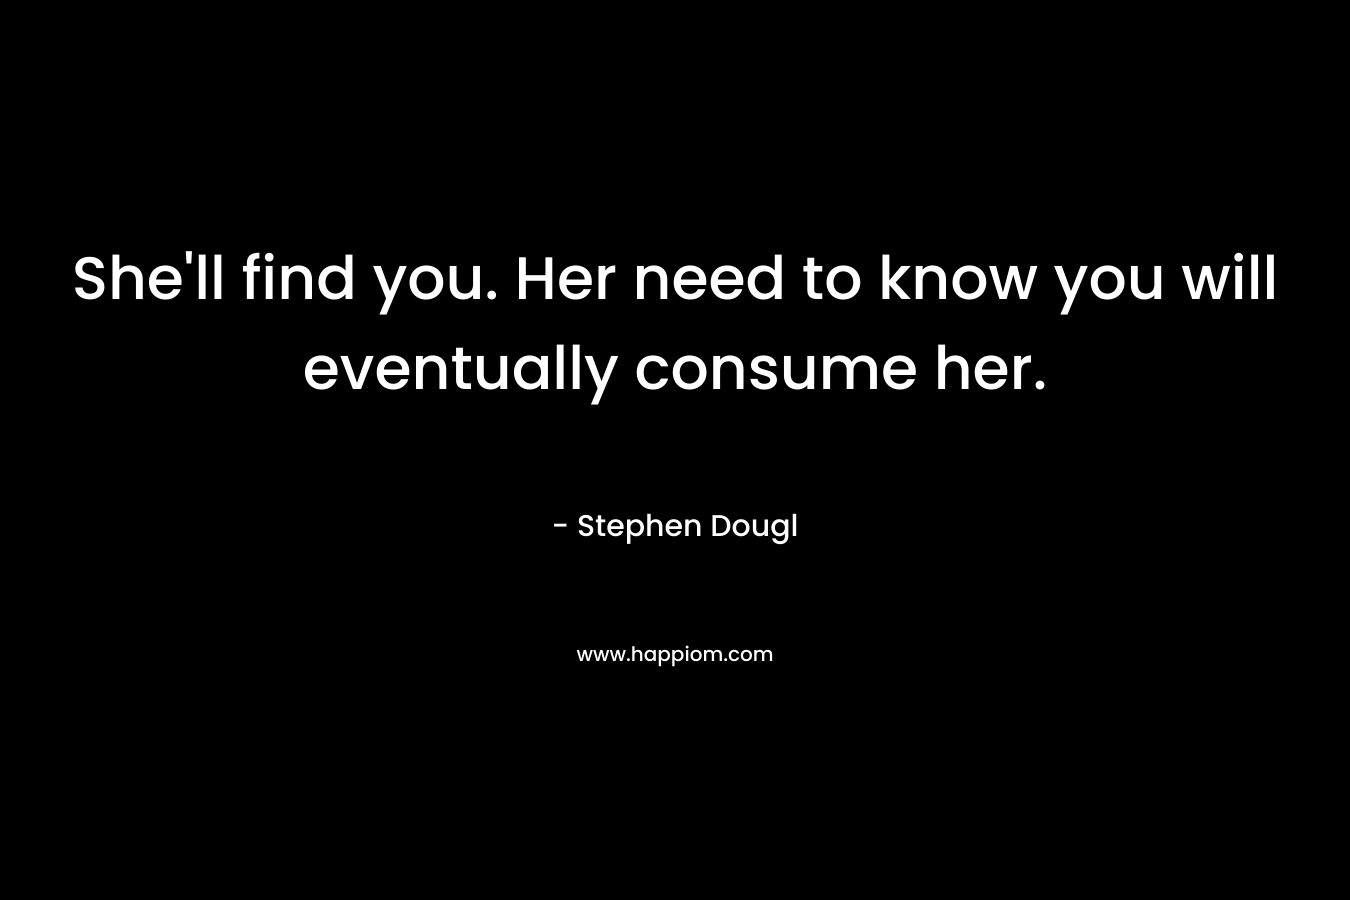 She’ll find you. Her need to know you will eventually consume her. – Stephen Dougl